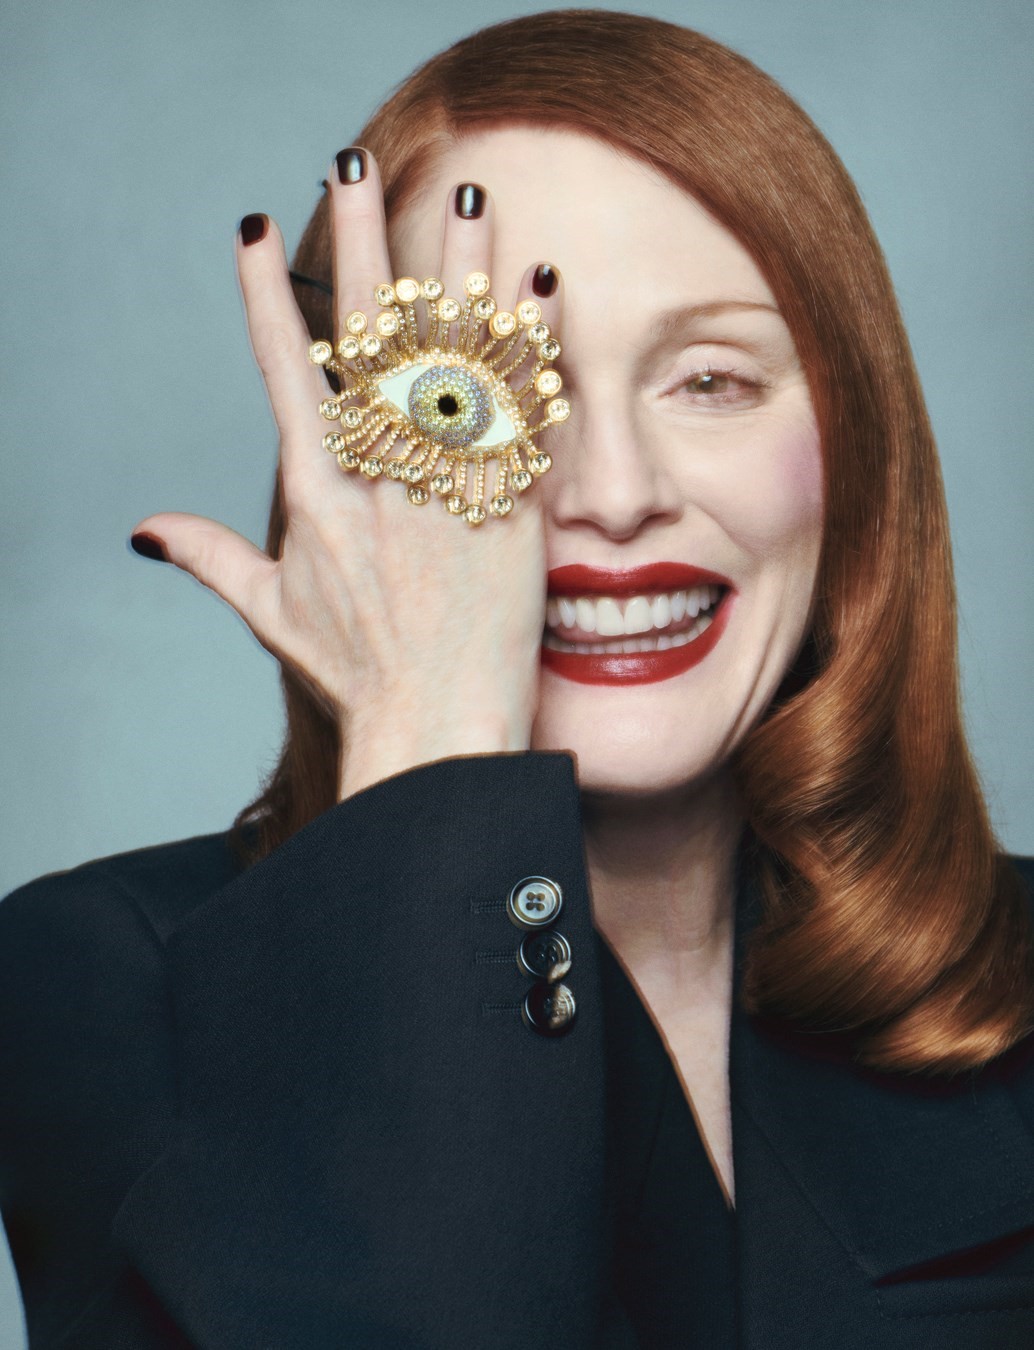 Julianne Moore: “I Want to Be Inside the Director's Story”